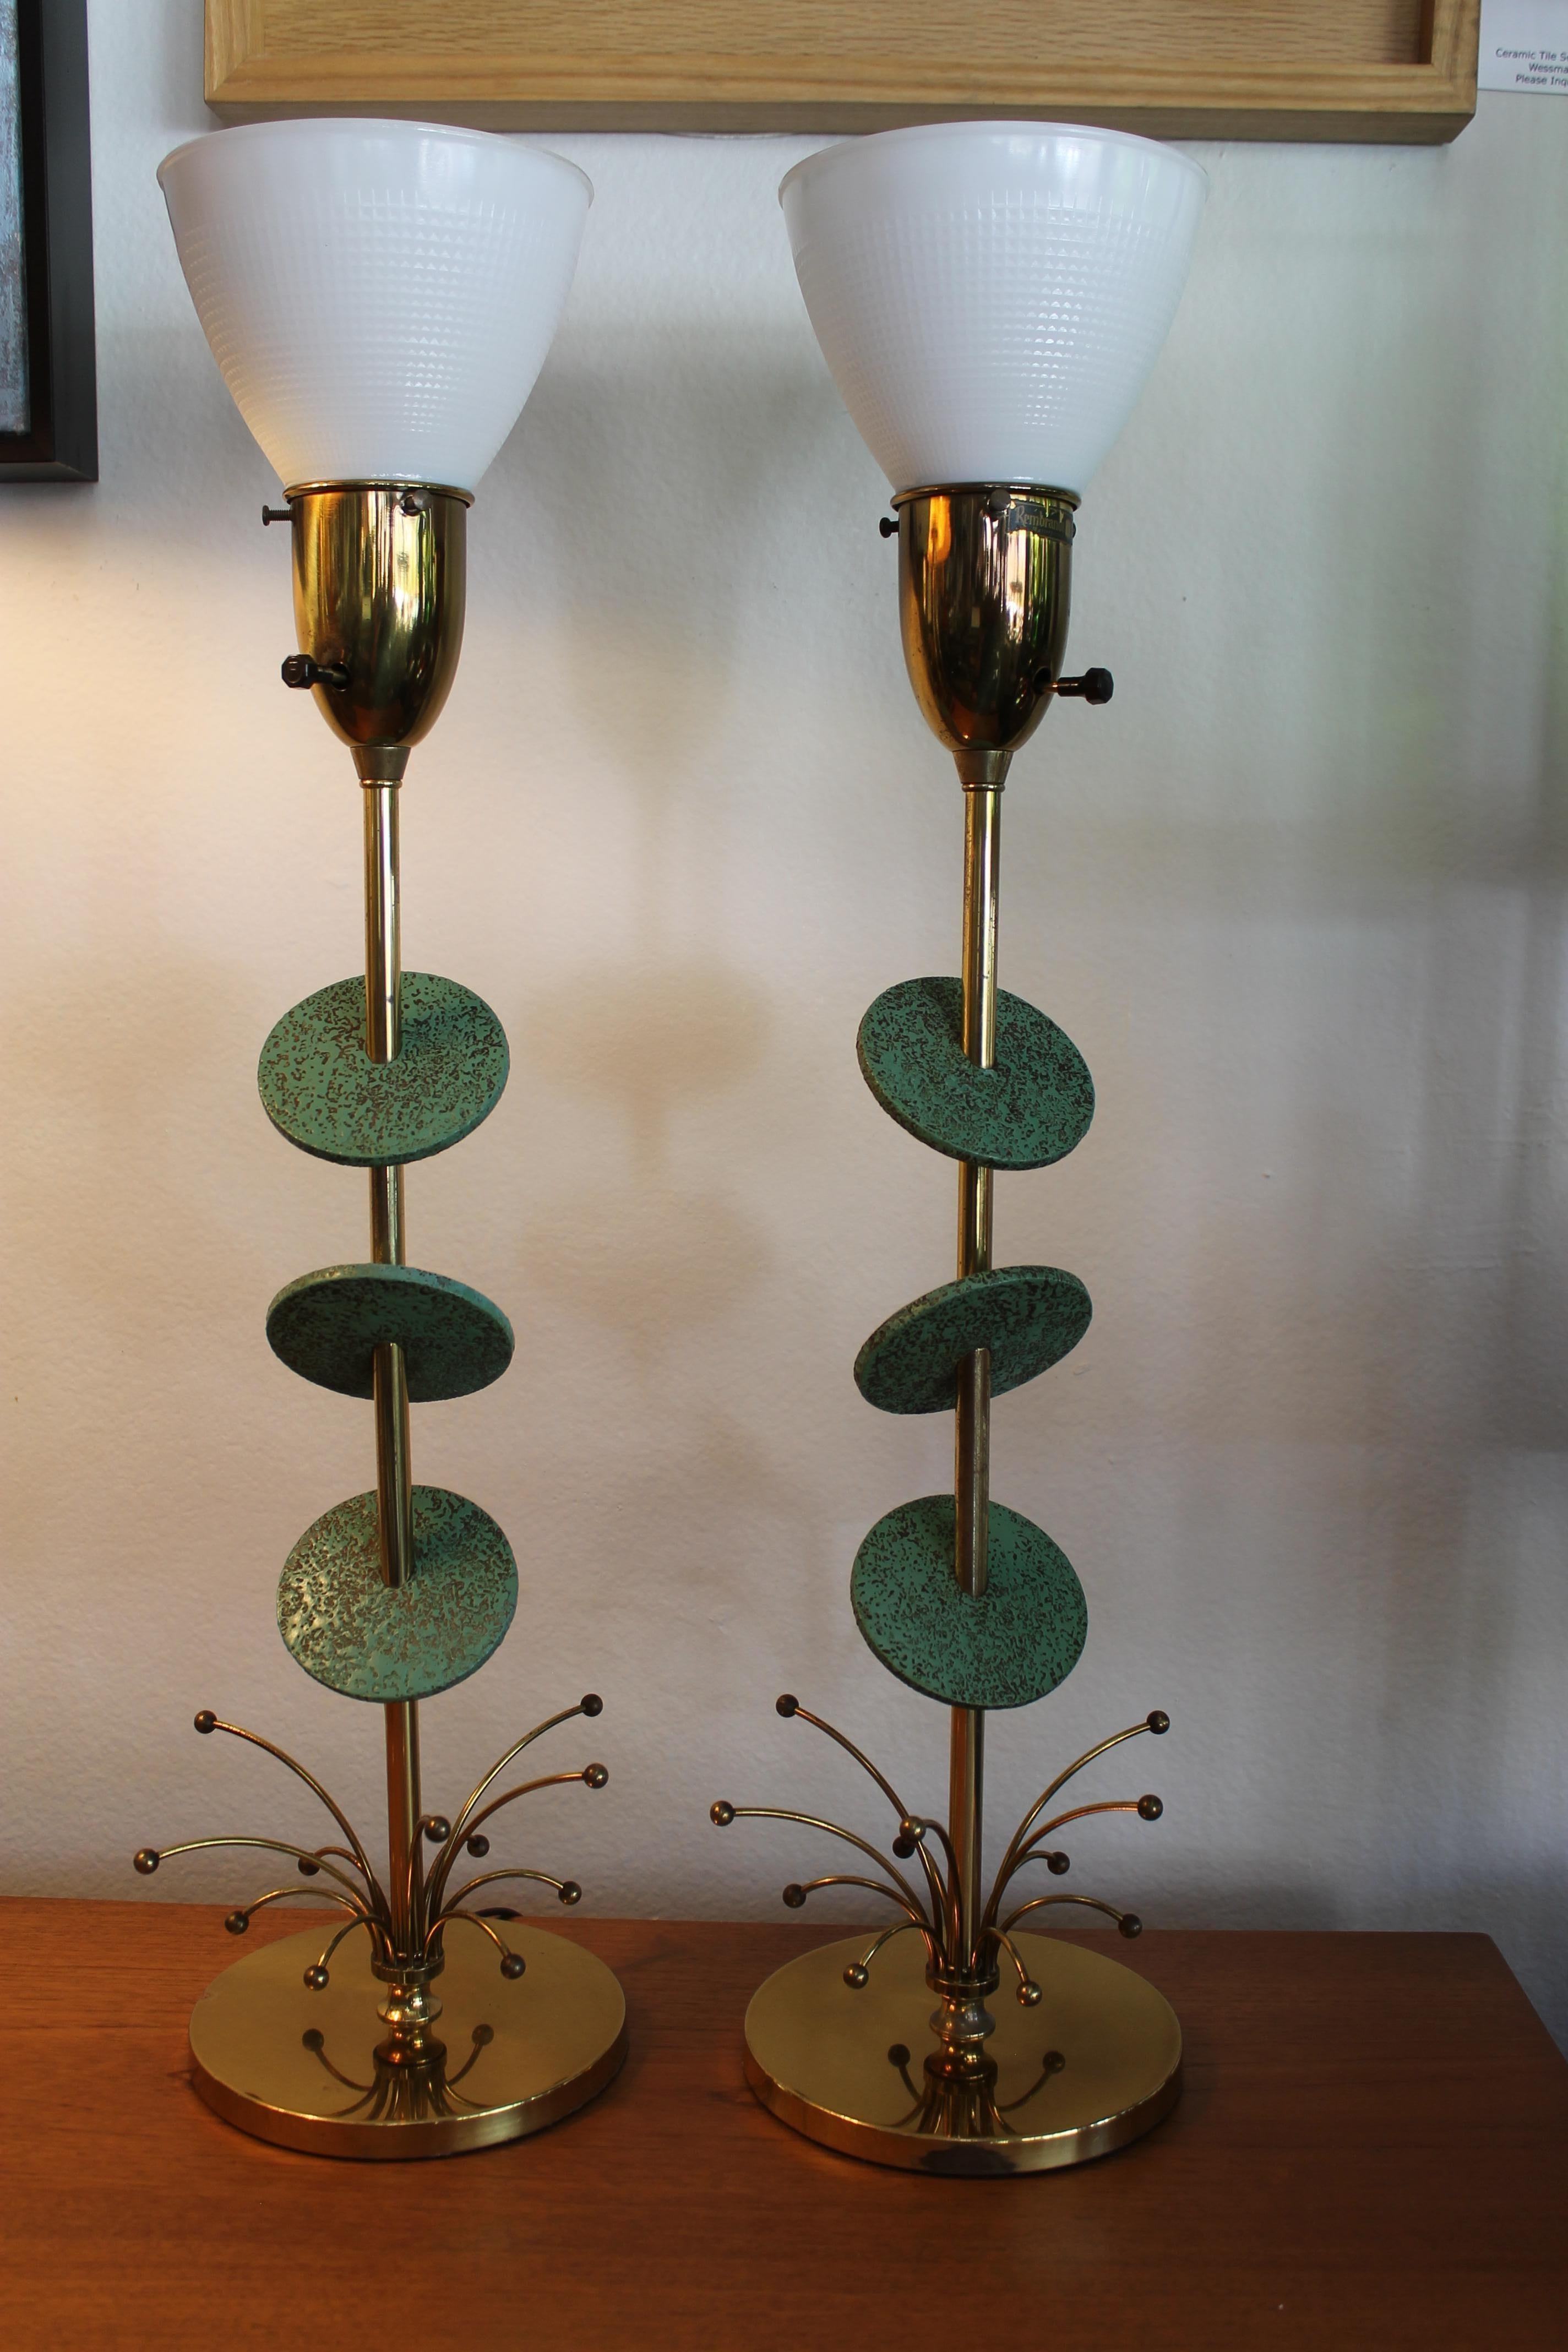 Pair of atomic Rembrandt Masterpiece lamps. Each lamp has 3 painted wood discs. Each lamp measures 27.5